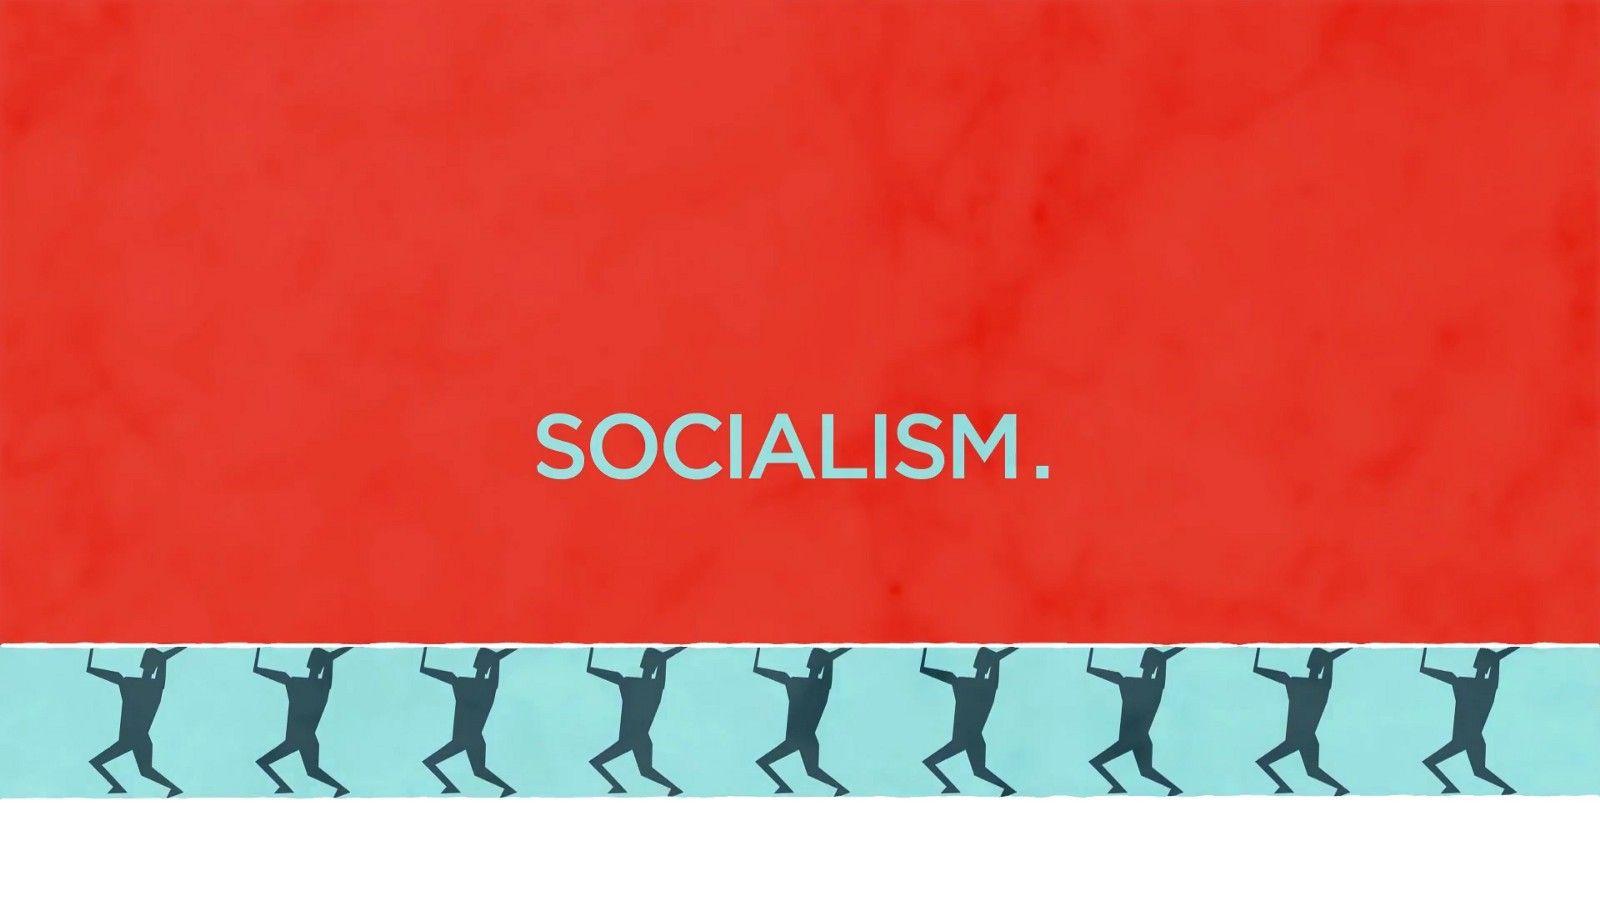 What liberals and conservatives get wrong about socialism